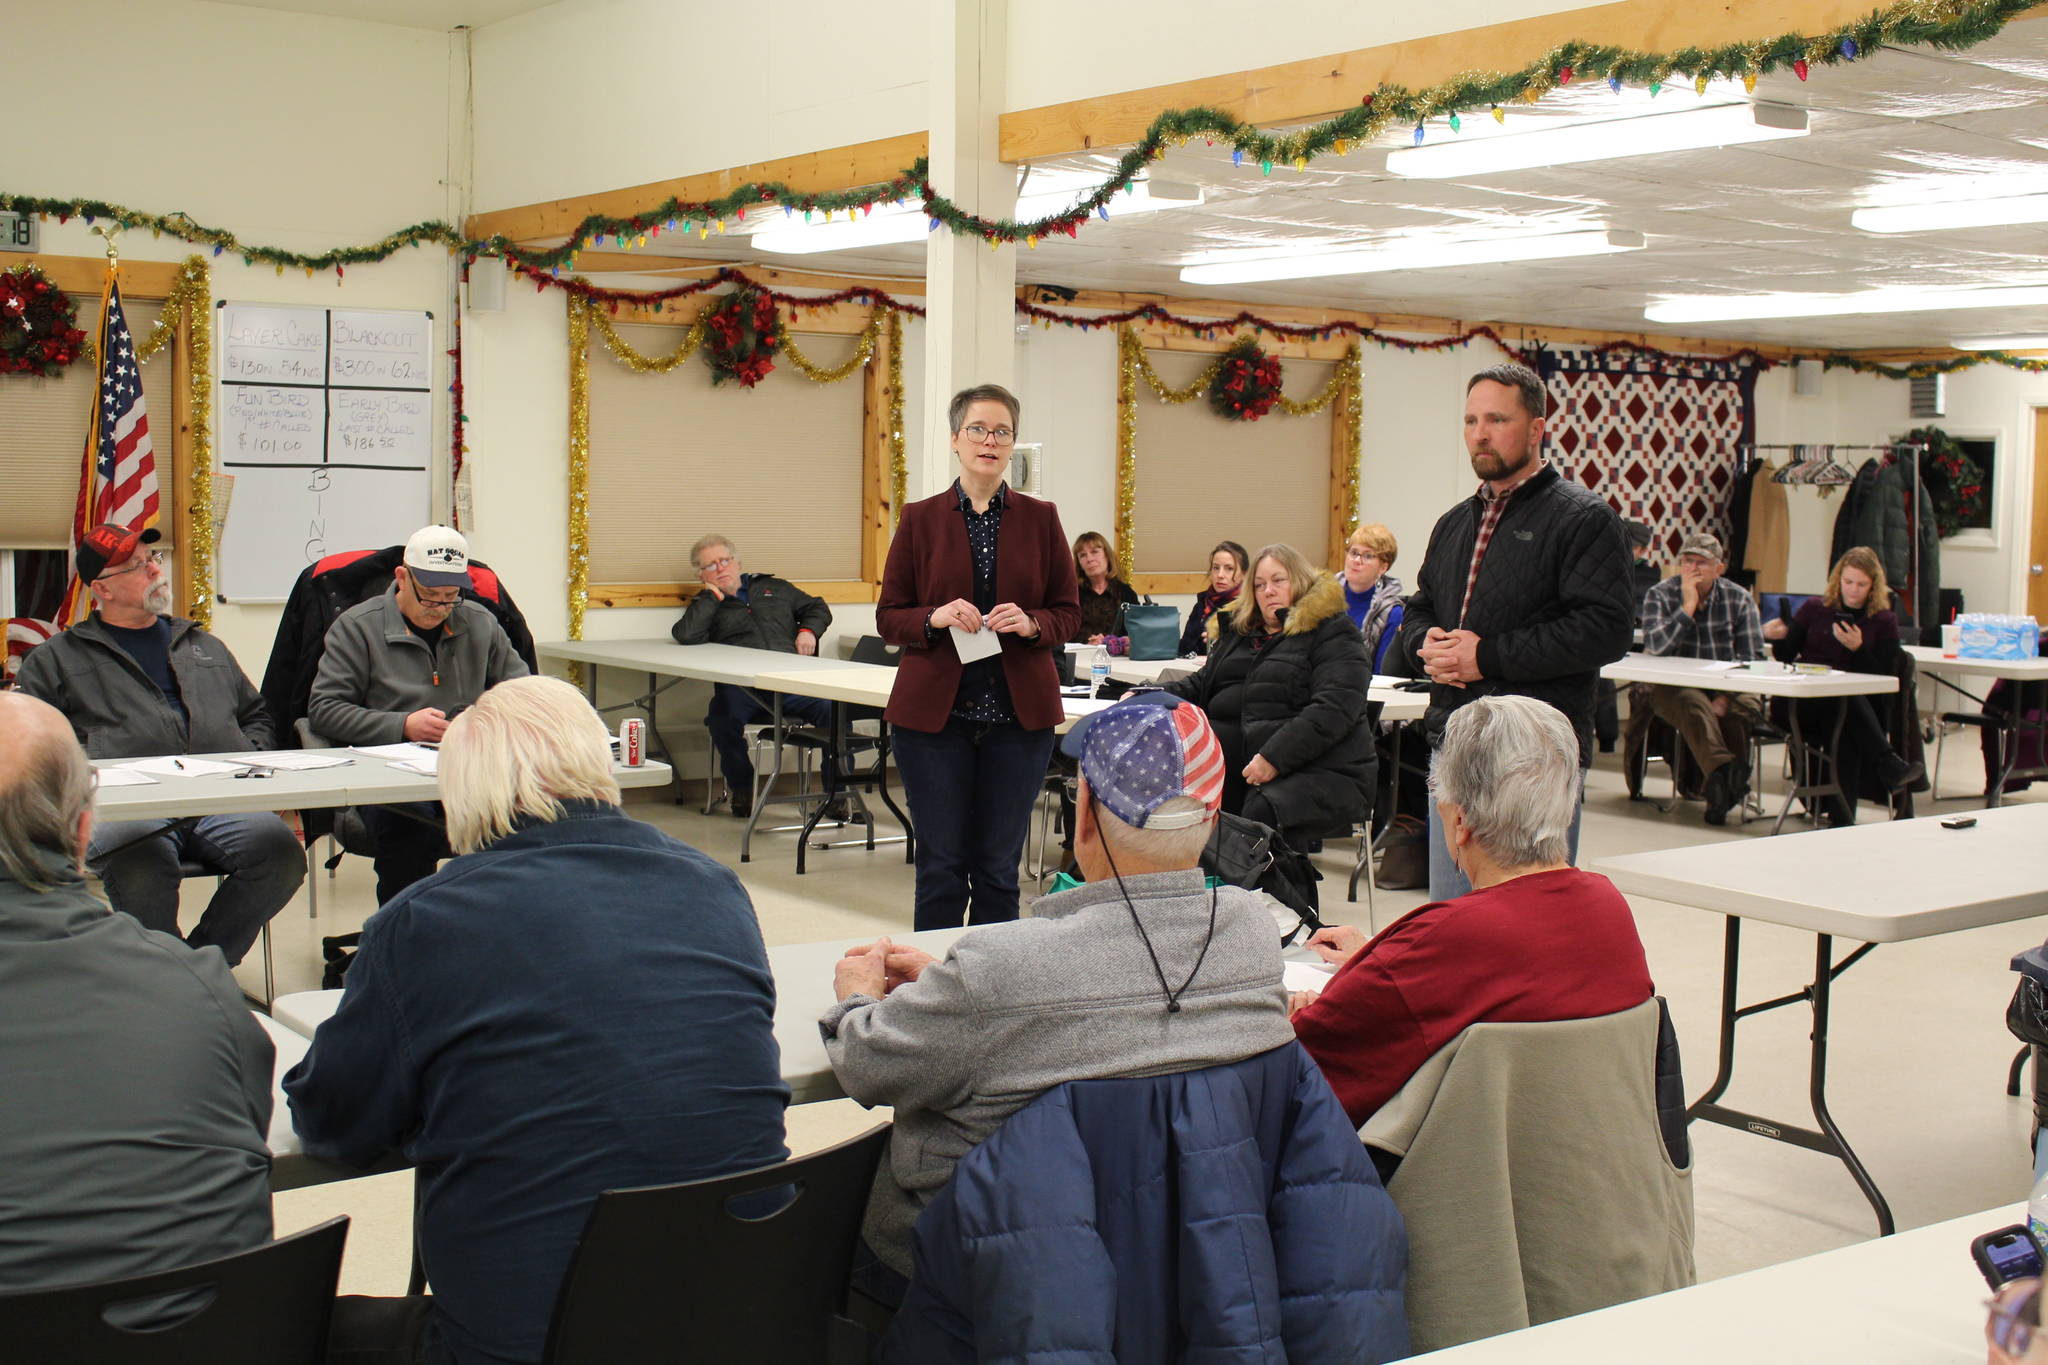 Rep. Sarah Vance, R-Homer, left and Rep. Ben Carpenter, R-Nikiski, right, speak to constituents during a town hall at the Funny River Community Center in Funny River, Alaska, on Thursday, Jan. 9, 2020. (Photo by Brian Mazurek/Peninsula Clarion)